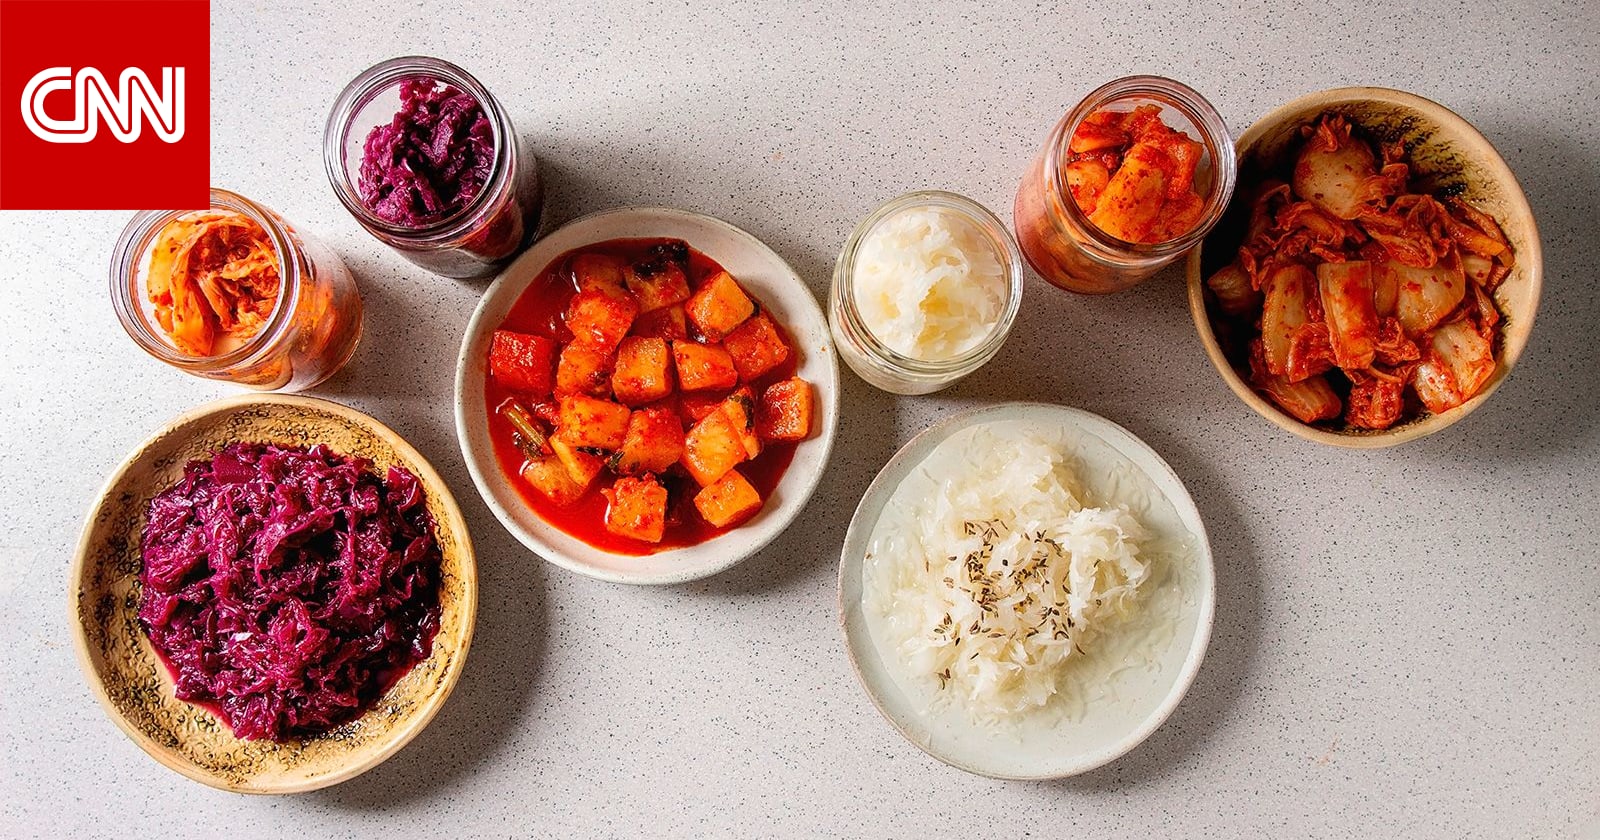 Discover the Benefits of Fermented Foods: A Guide to Probiotic-rich Yogurt, Miso, Kombucha, Sauerkraut and Kimchi!